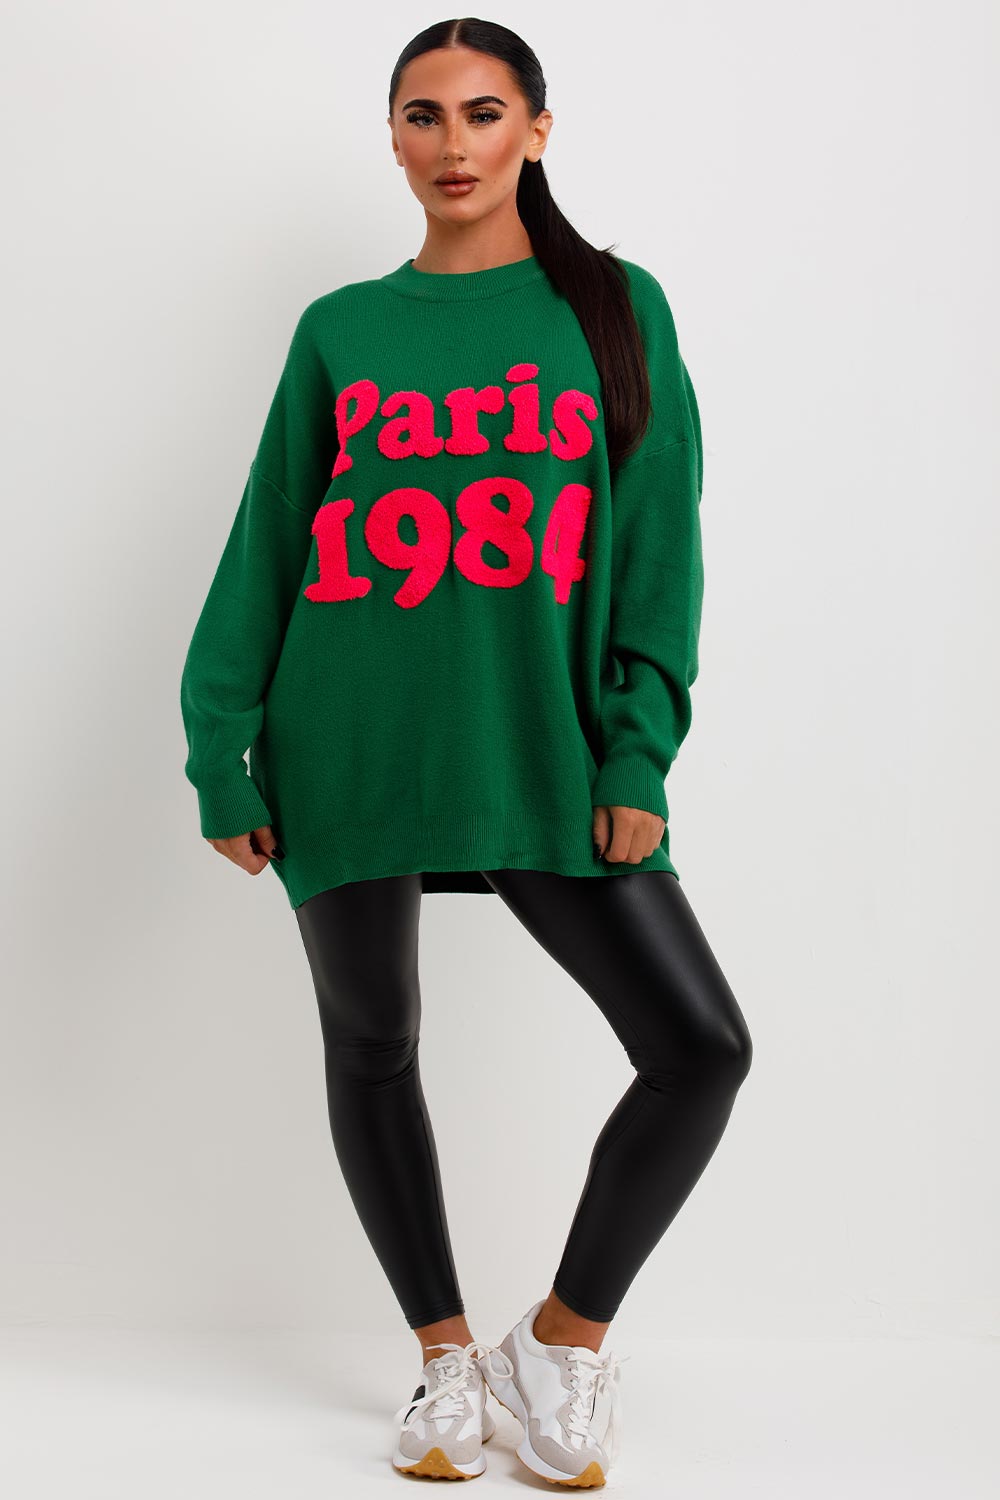 1984 towelling knitted jumper oversized